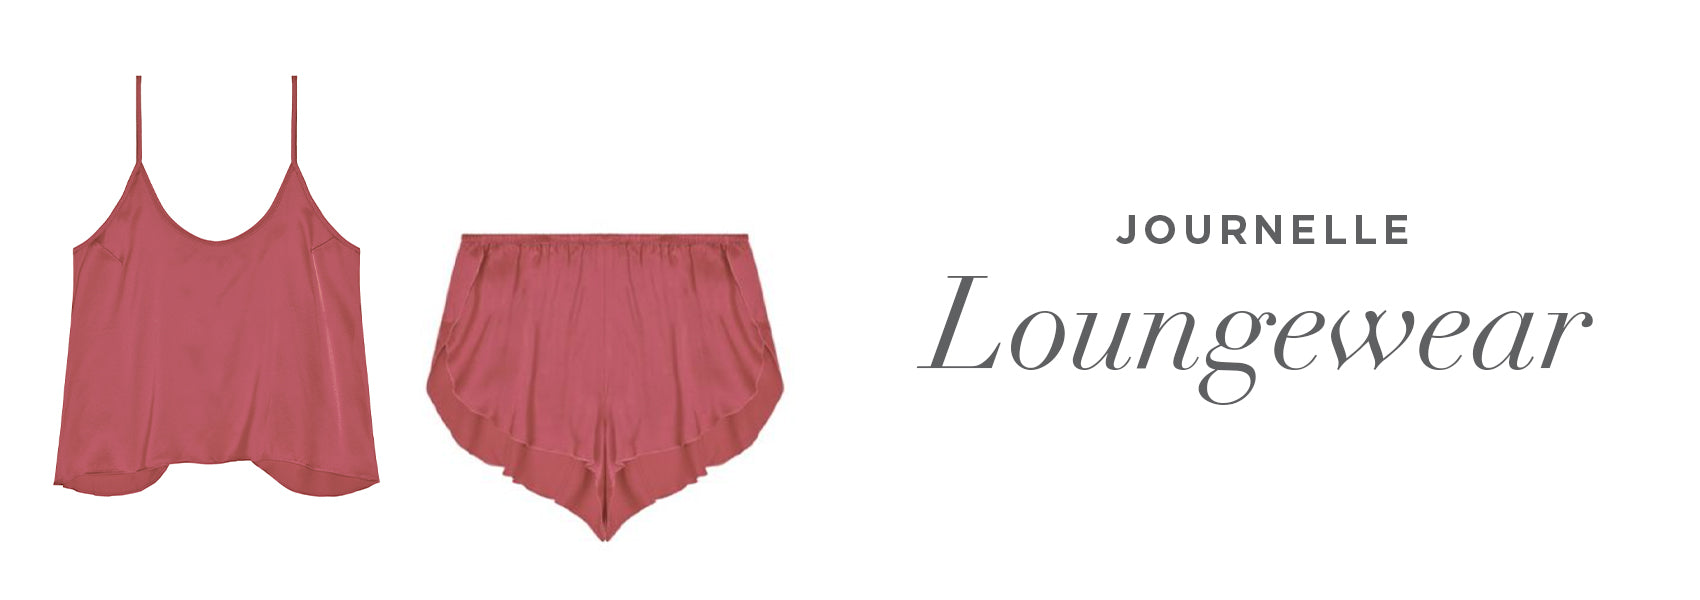 Journelle Celine cami and short in Rose. Text says, "Journelle Loungewear"